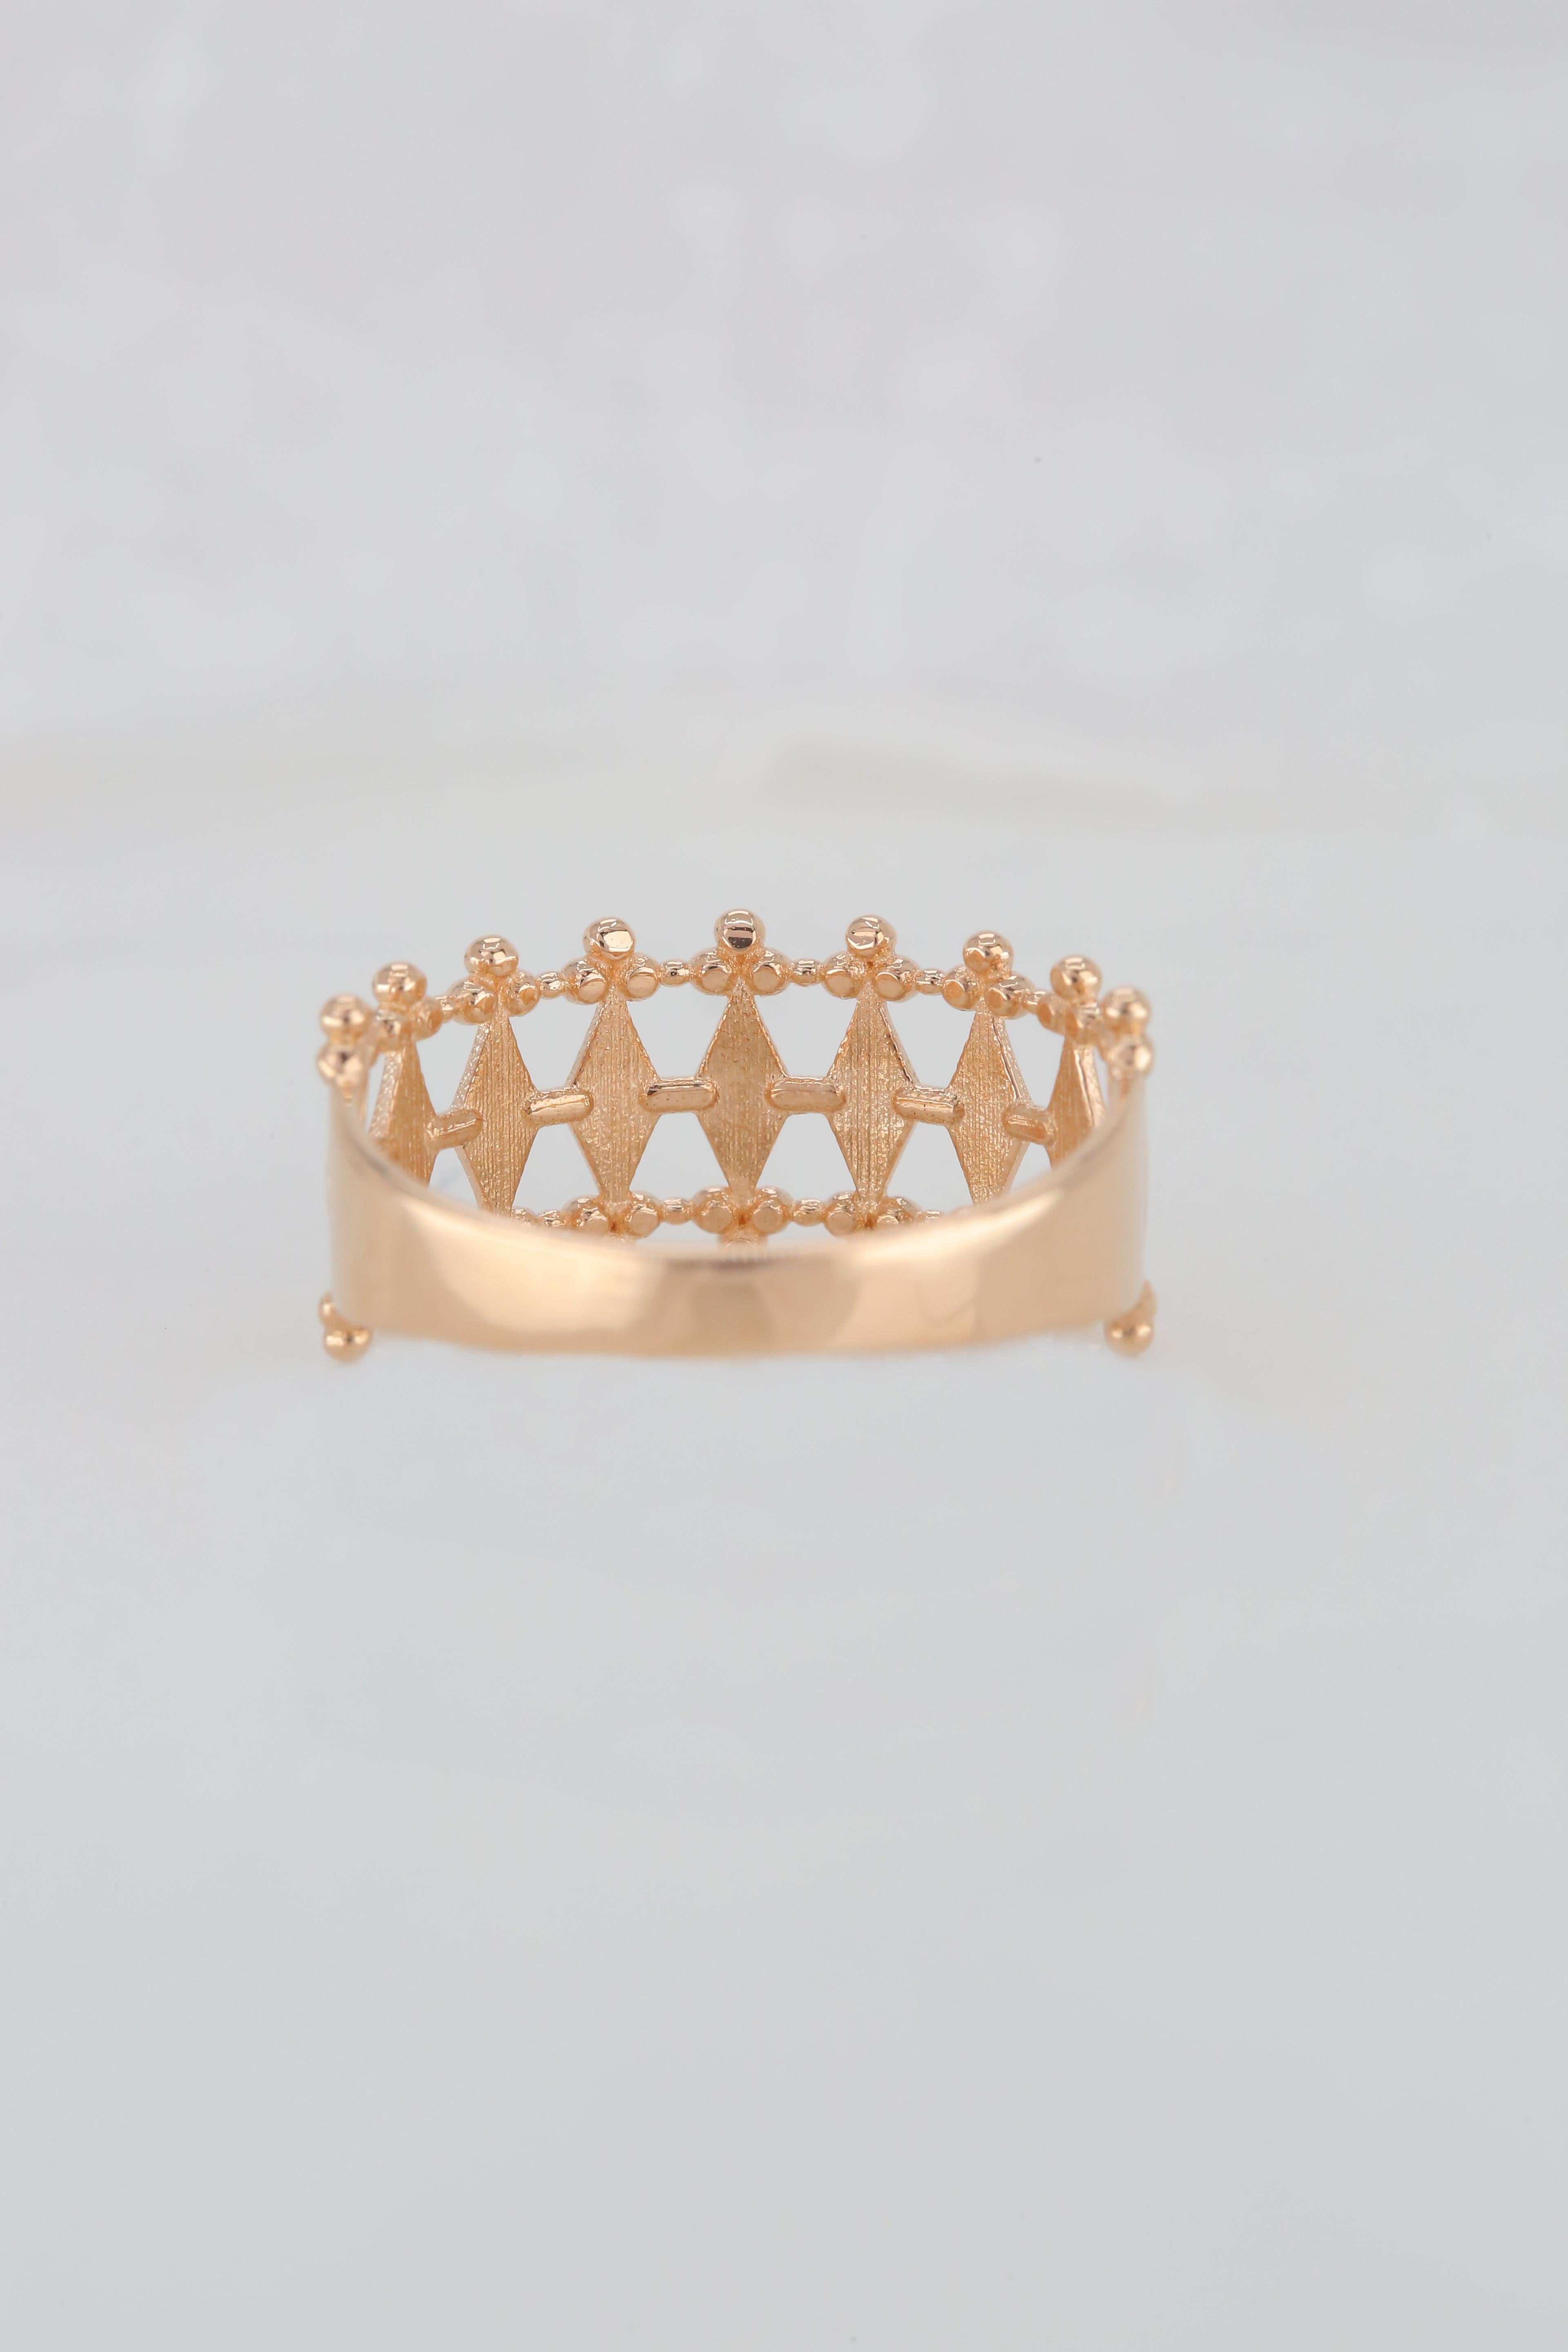 For Sale:  14k Gold Fence Ring, Dainty Fence Ring, 14k Gold Dainty Fence Shaped Ring, Fence 3